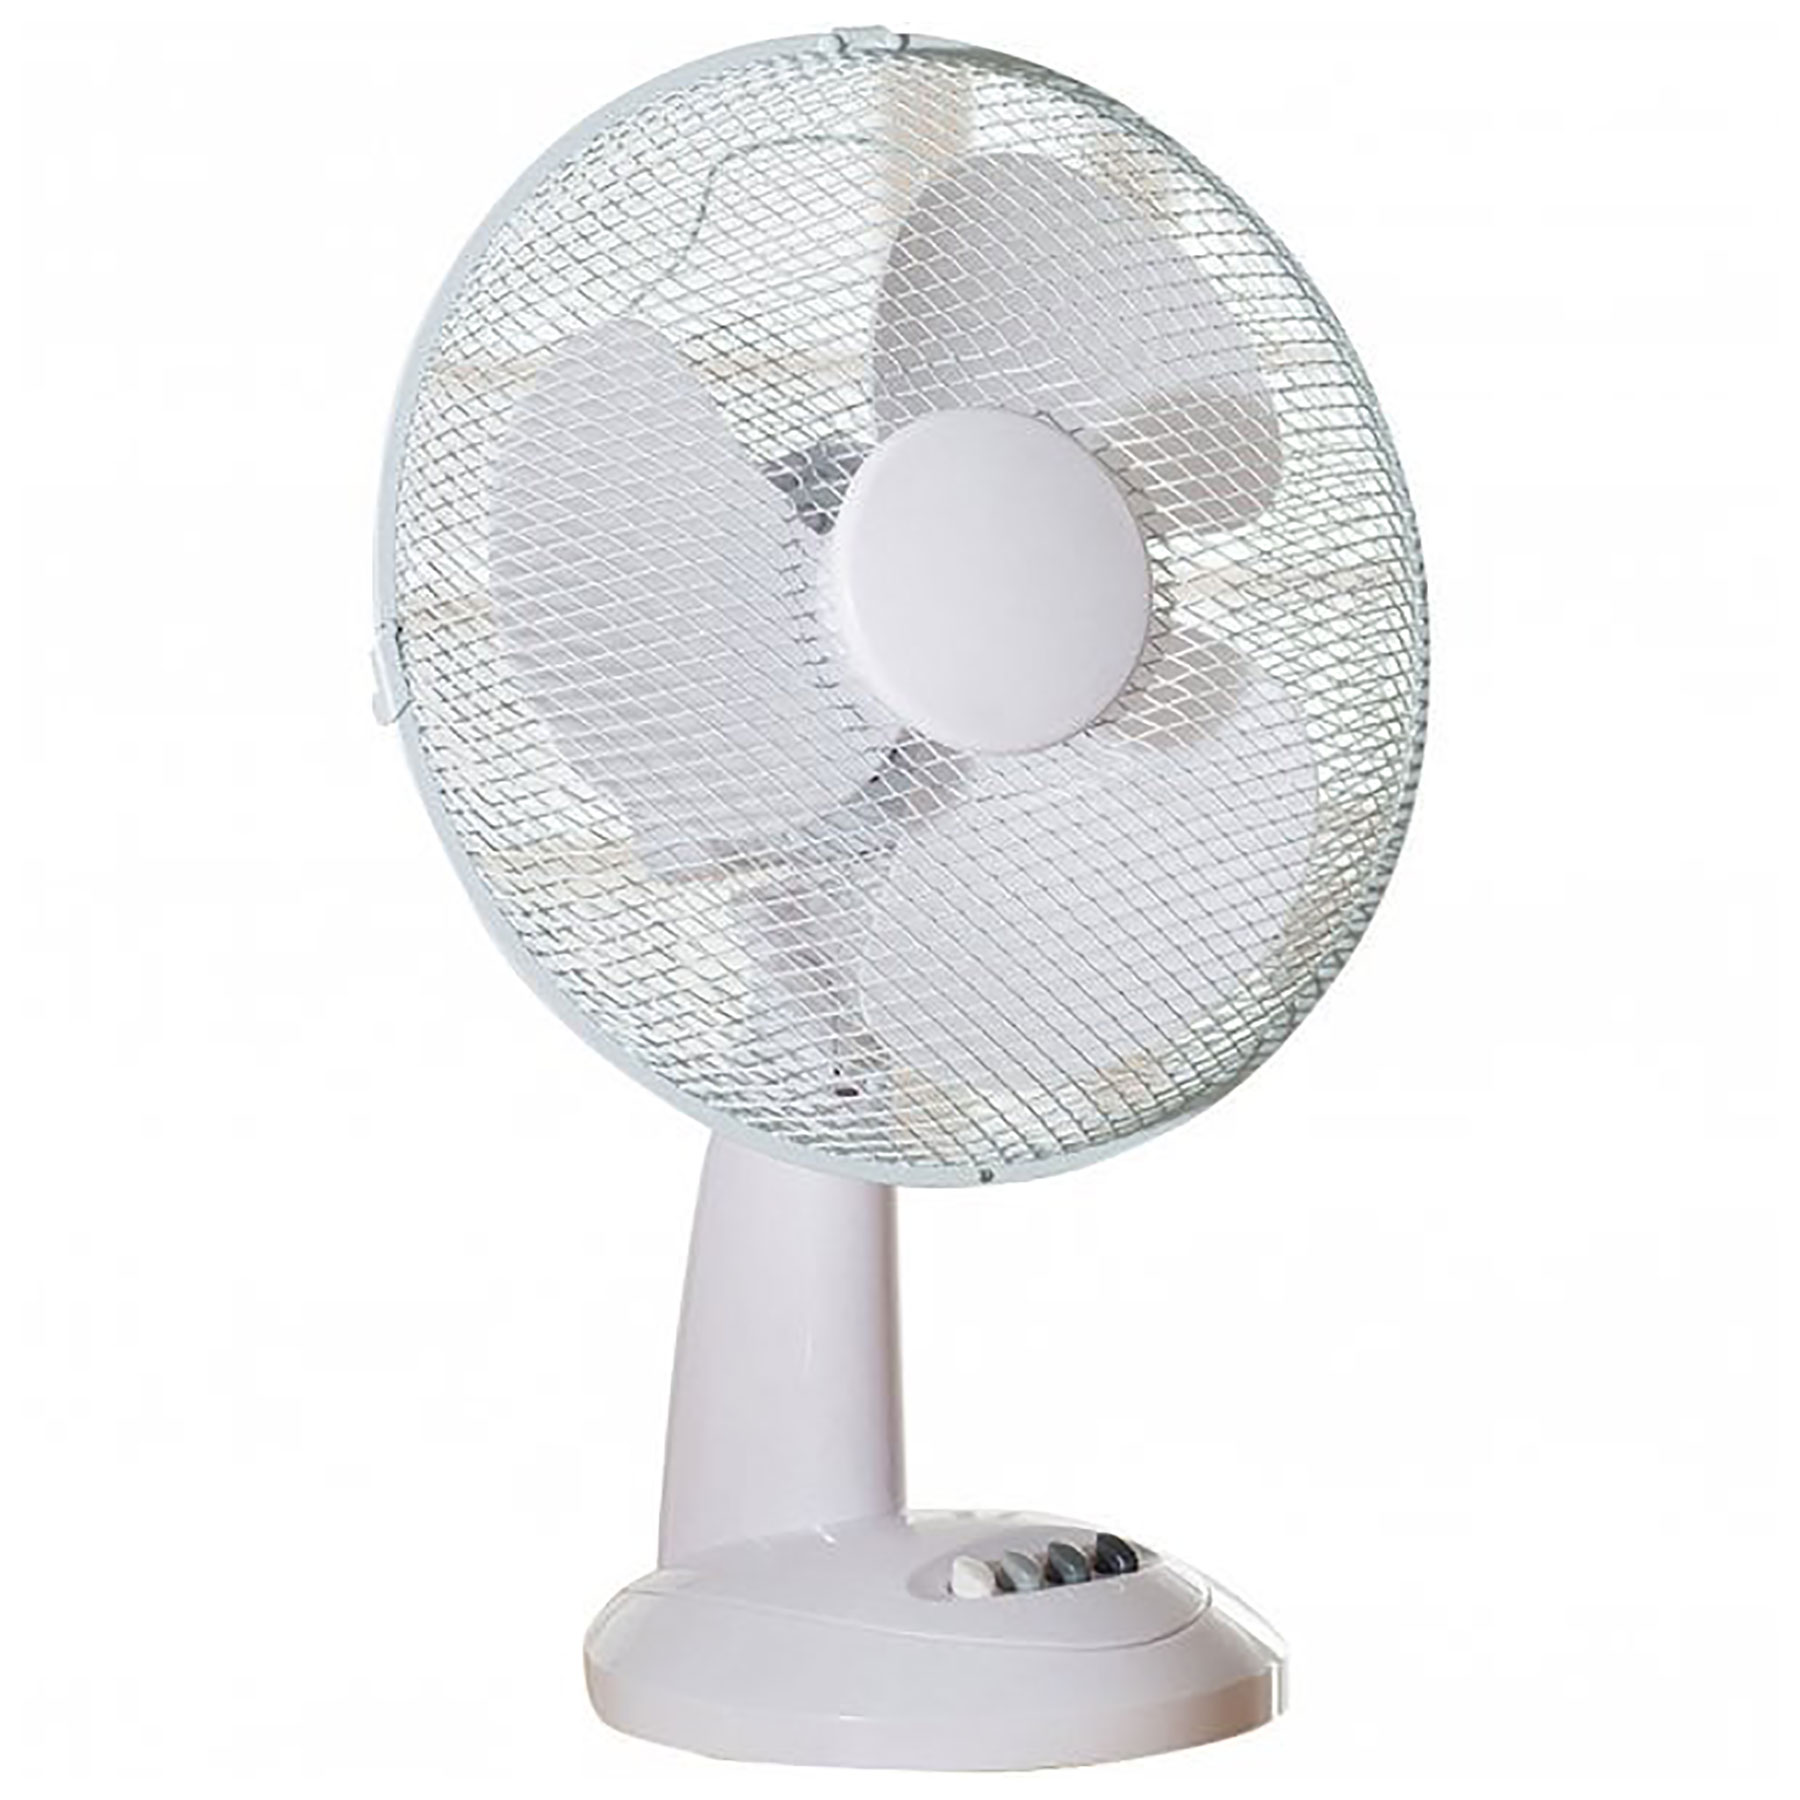 Image of Daewoo COL1567GE 12 Inch Oscillating Table Fan in White 3 Speeds